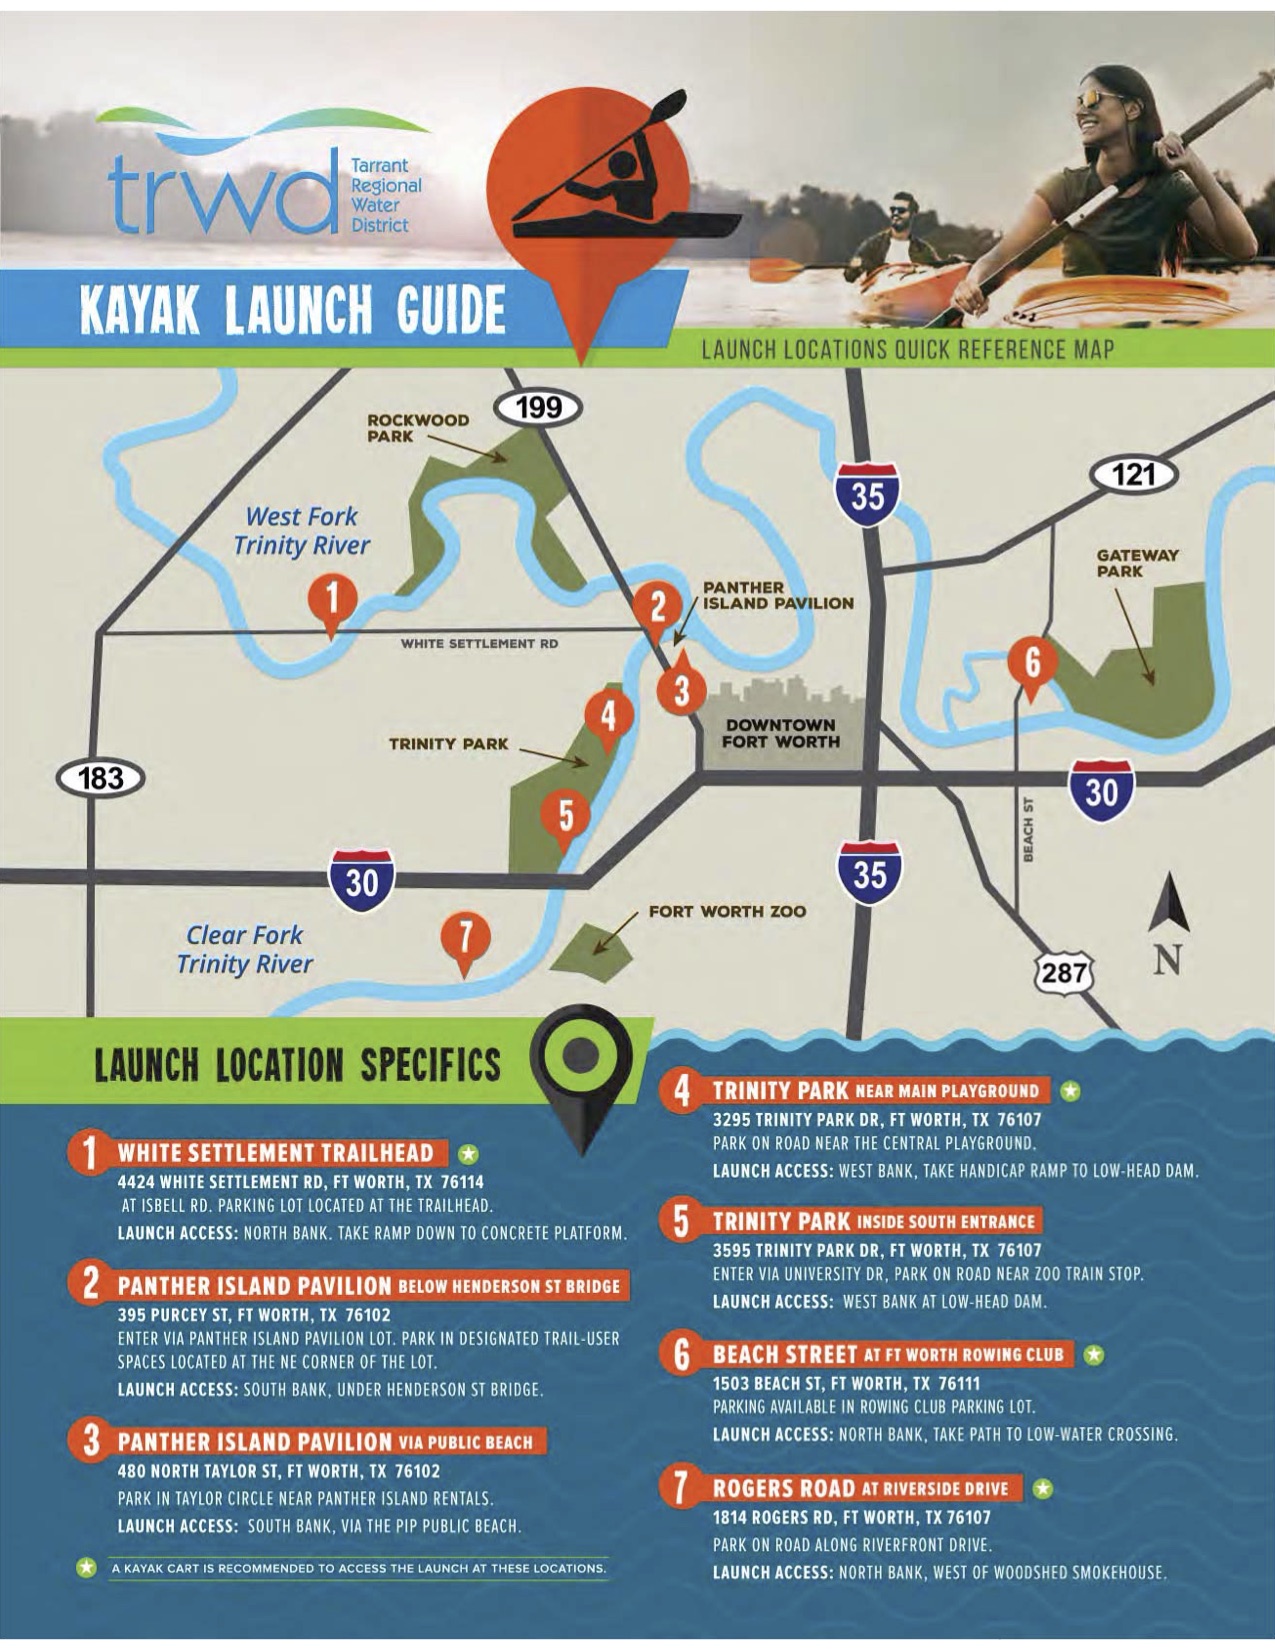 A helpful map courtesy of Tarrant Regional Water District that shows launch spots along the Trinity River.